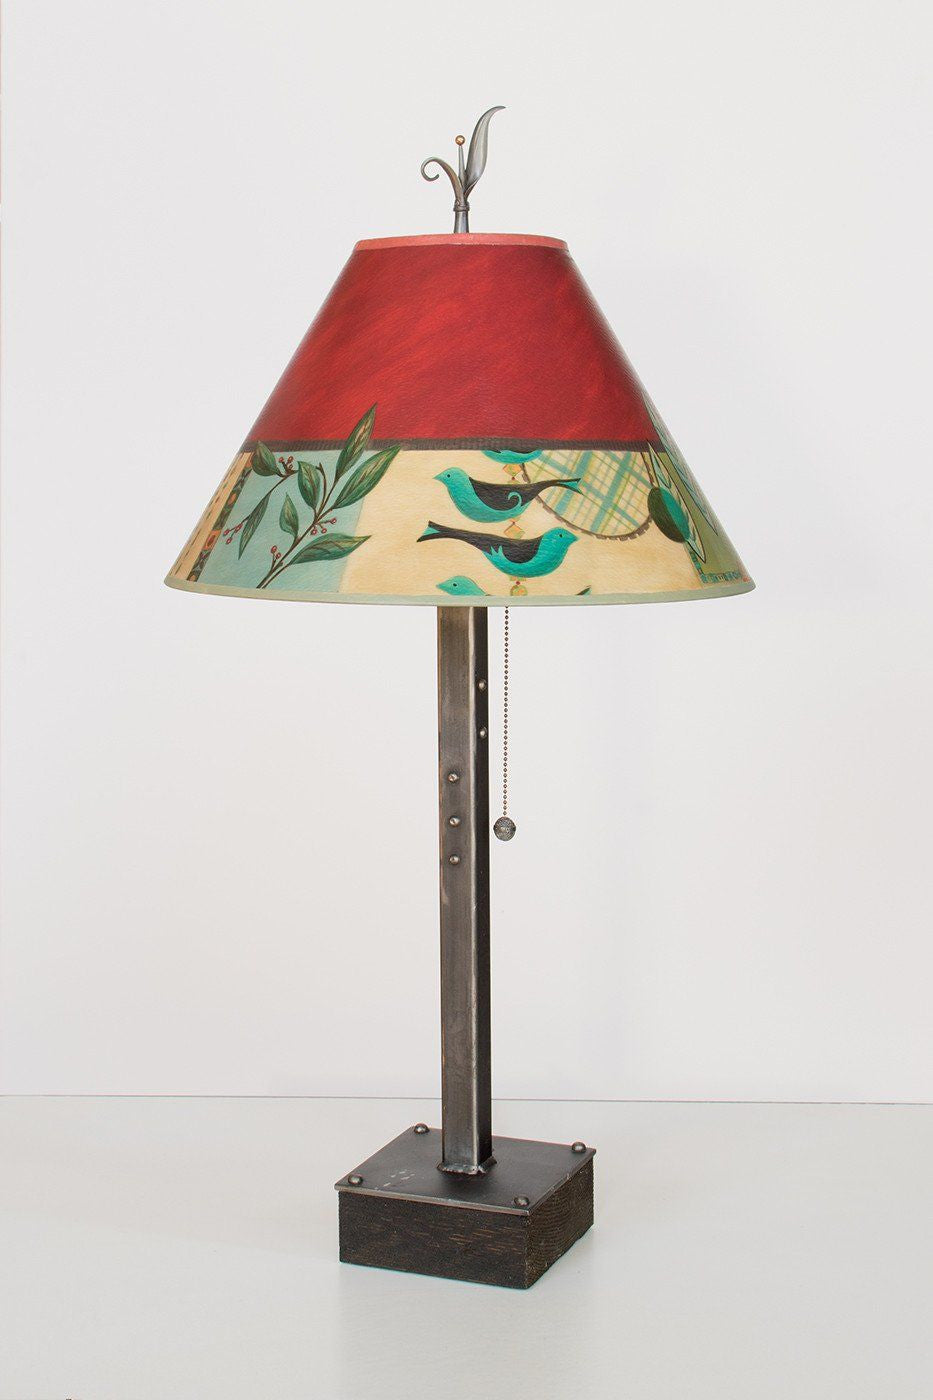 Steel Table Lamp on Wood with Medium Conical Shade in New Capri